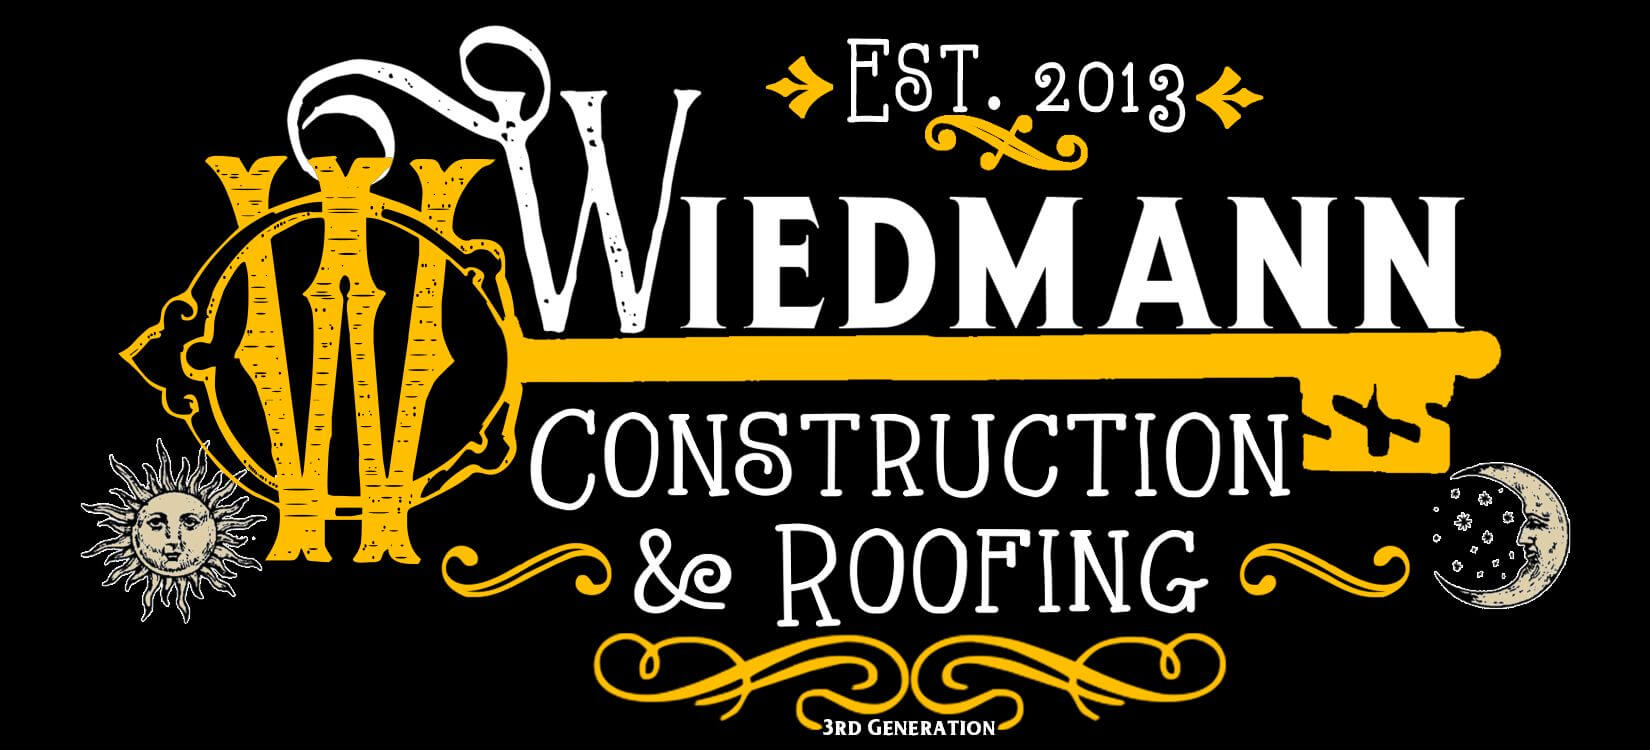 Wiedmann Construction and Roofing